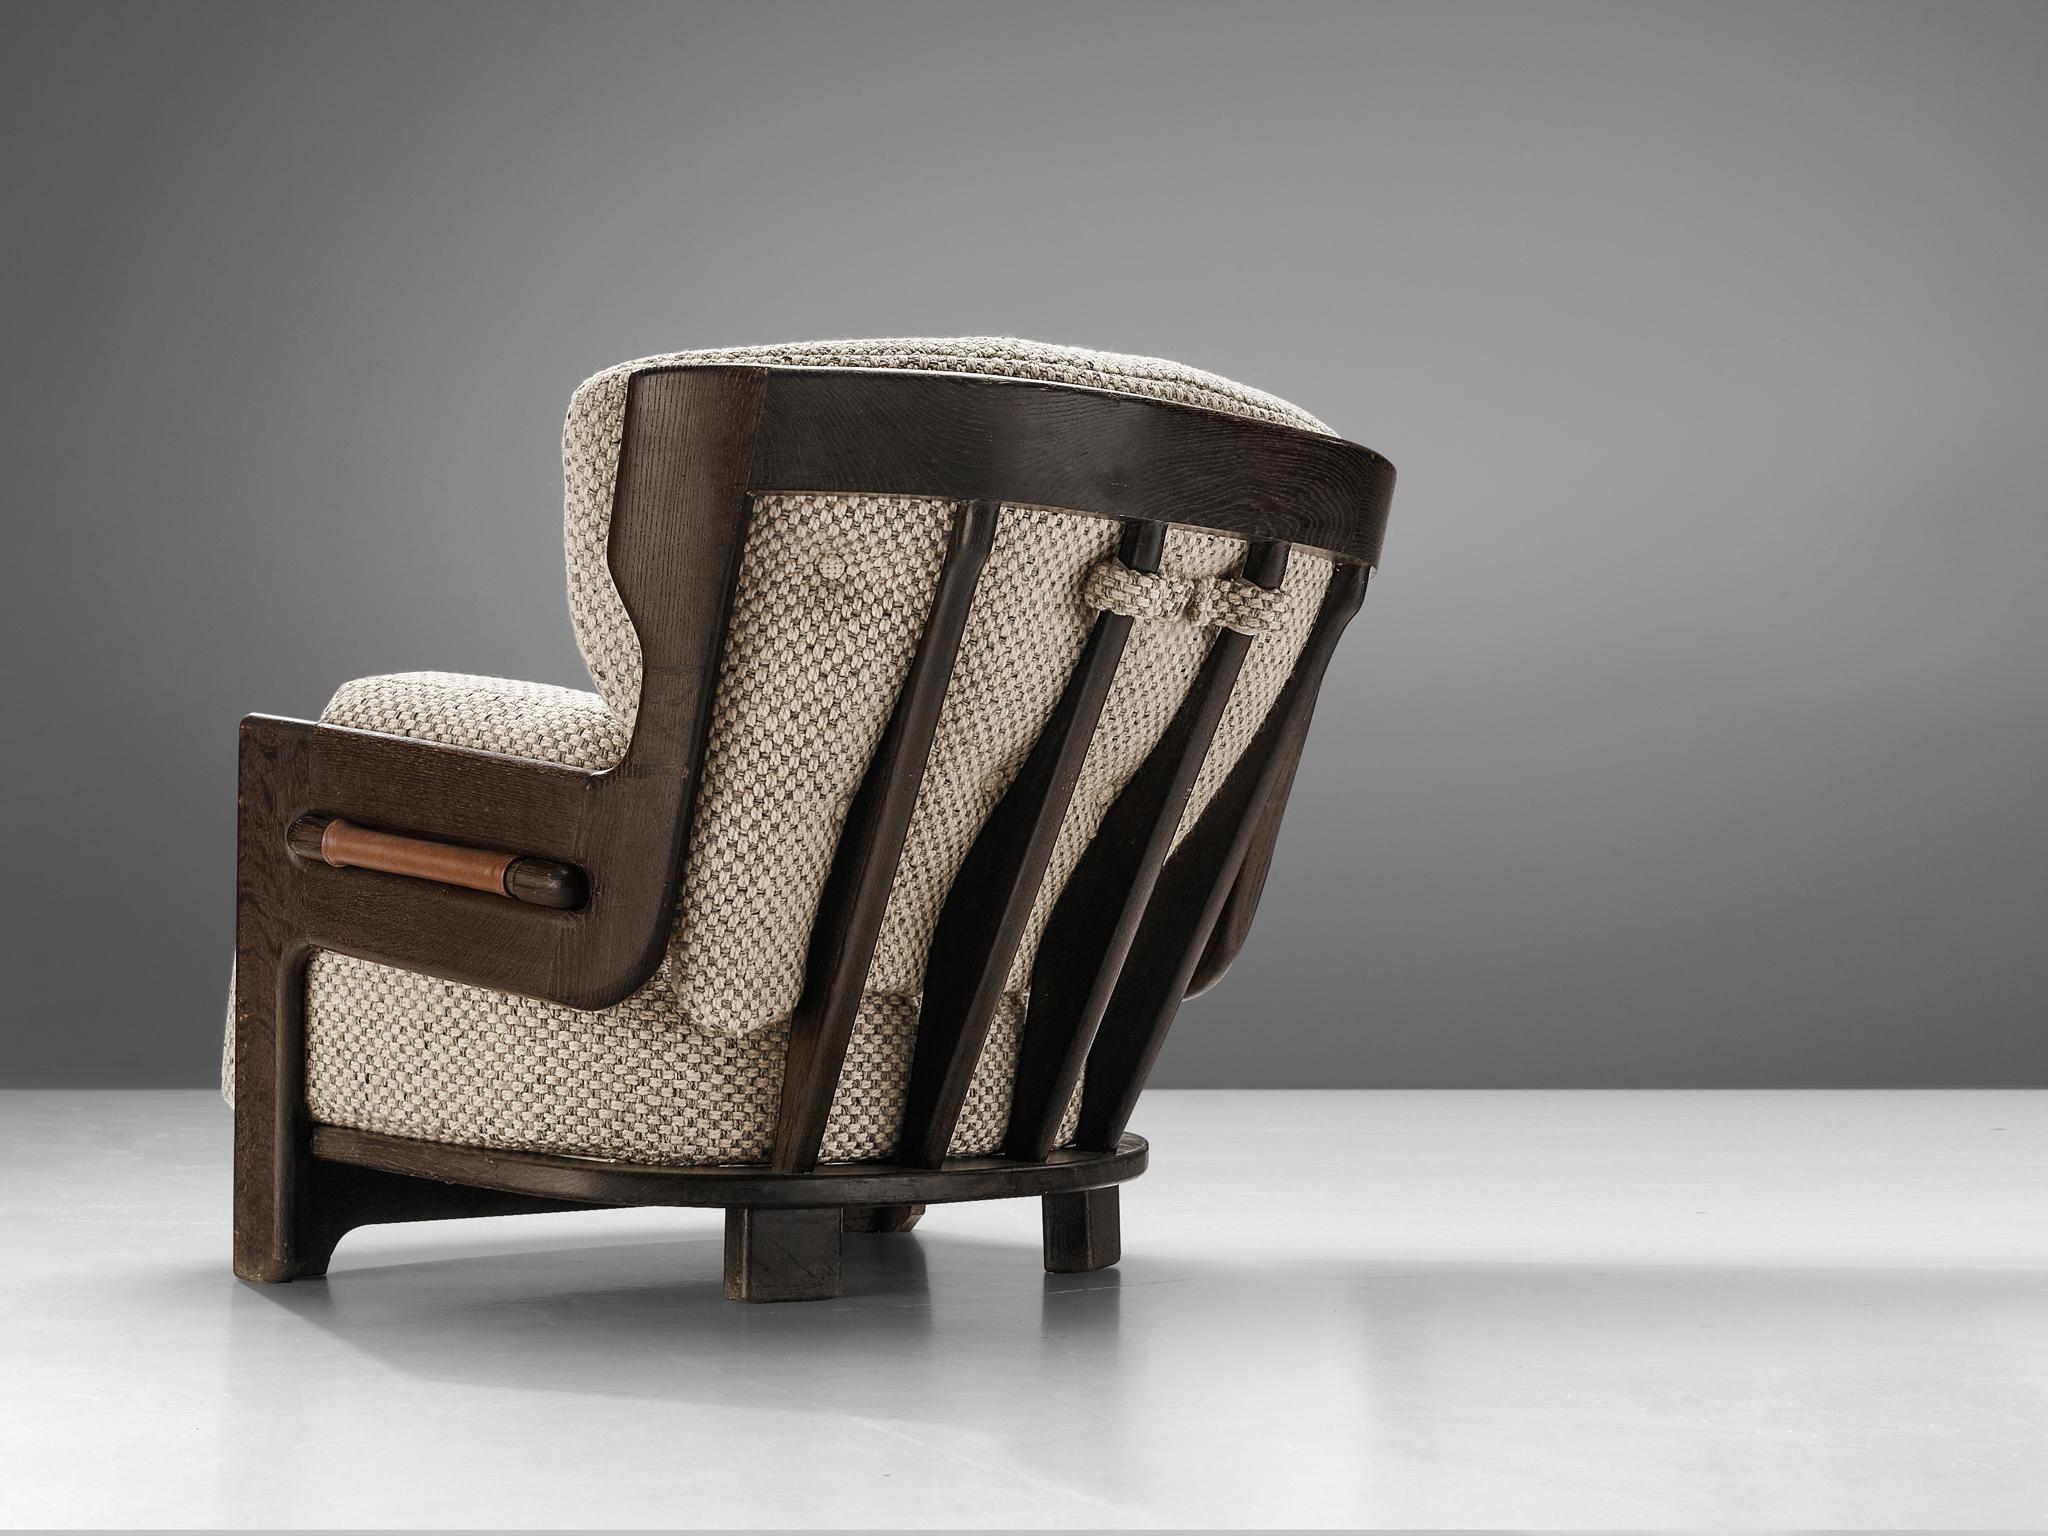 Guillerme & Chambron for Votre Maison, lounge chair model 'Denis', fabric, oak, France, 1960s

This ‘Denis’ lounge chair is designed by the French designer duo Jacques Chambron and Robert Guillerme. The design features a stable construction